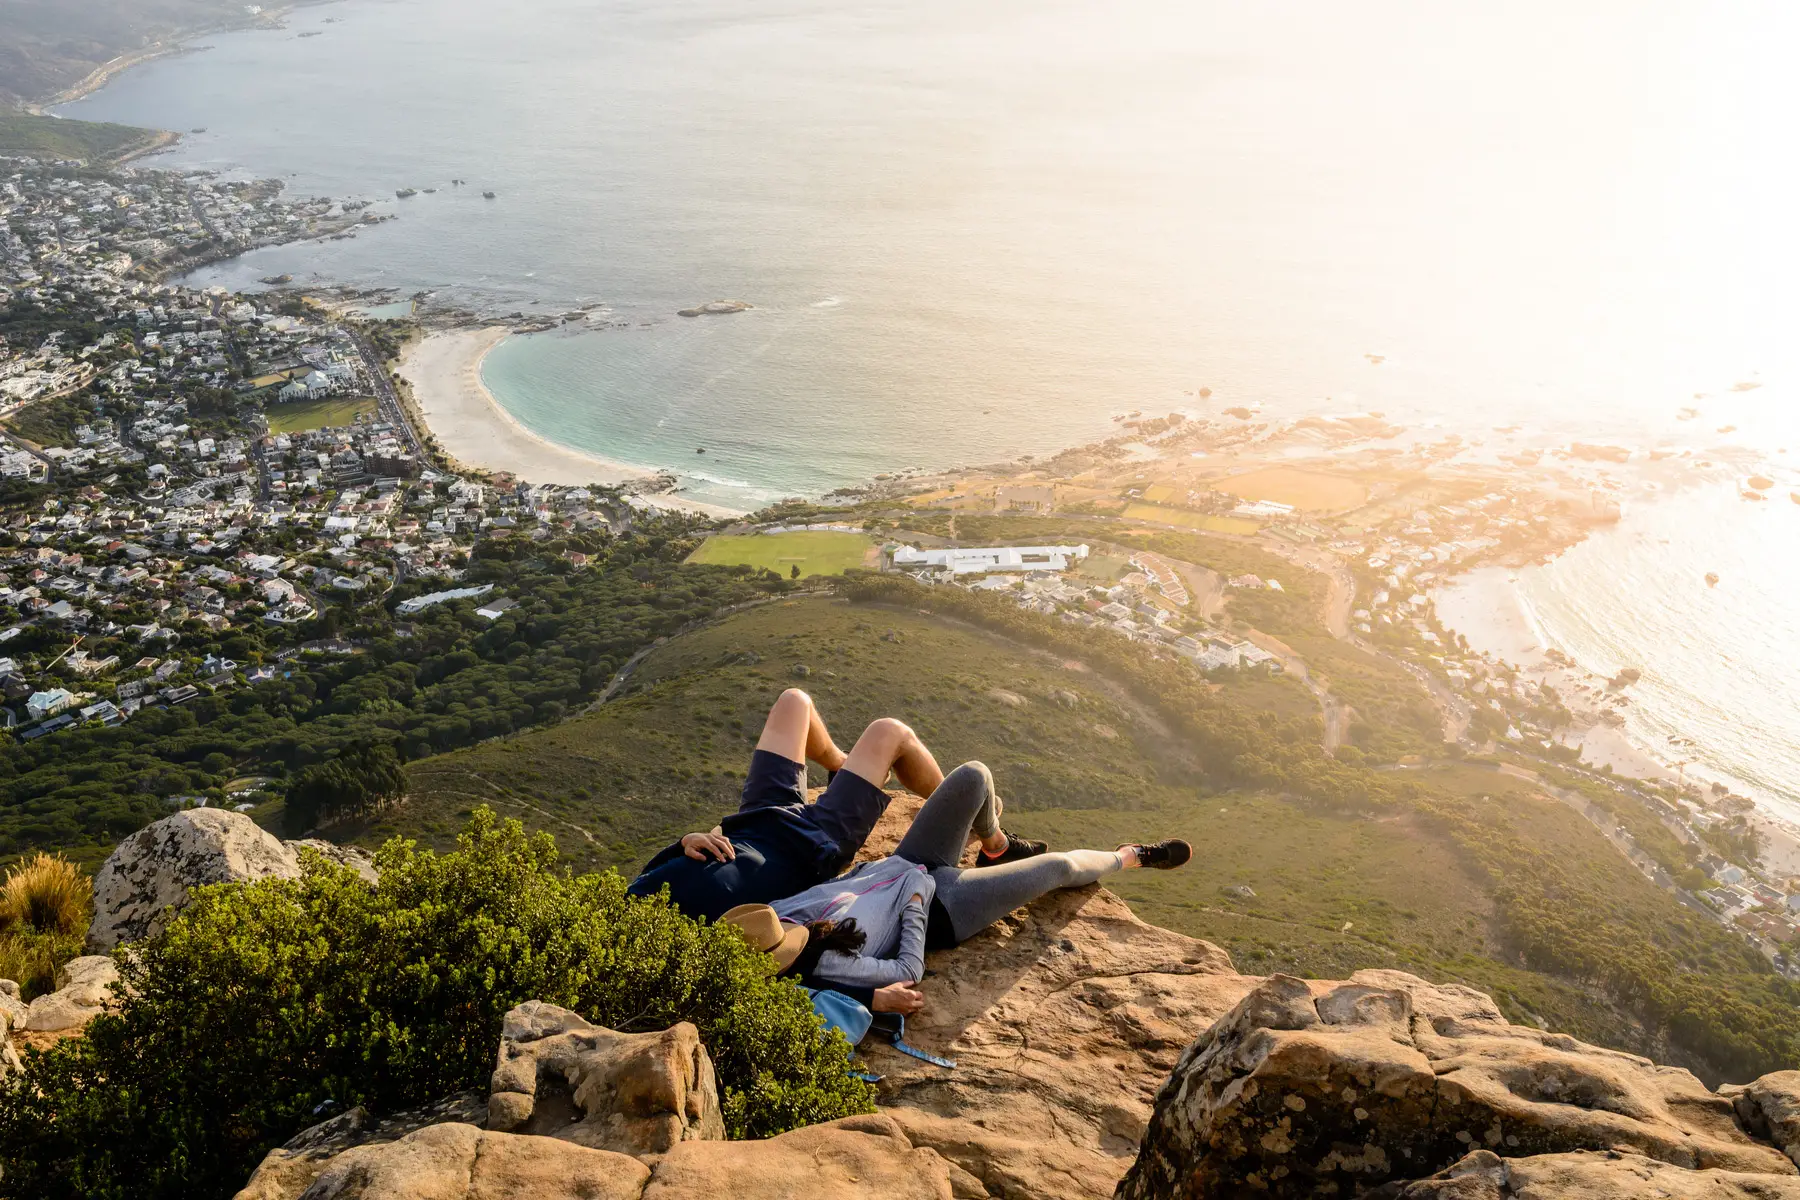 A couple enjoying the view atop Lion's Head Mountain in Cape Town